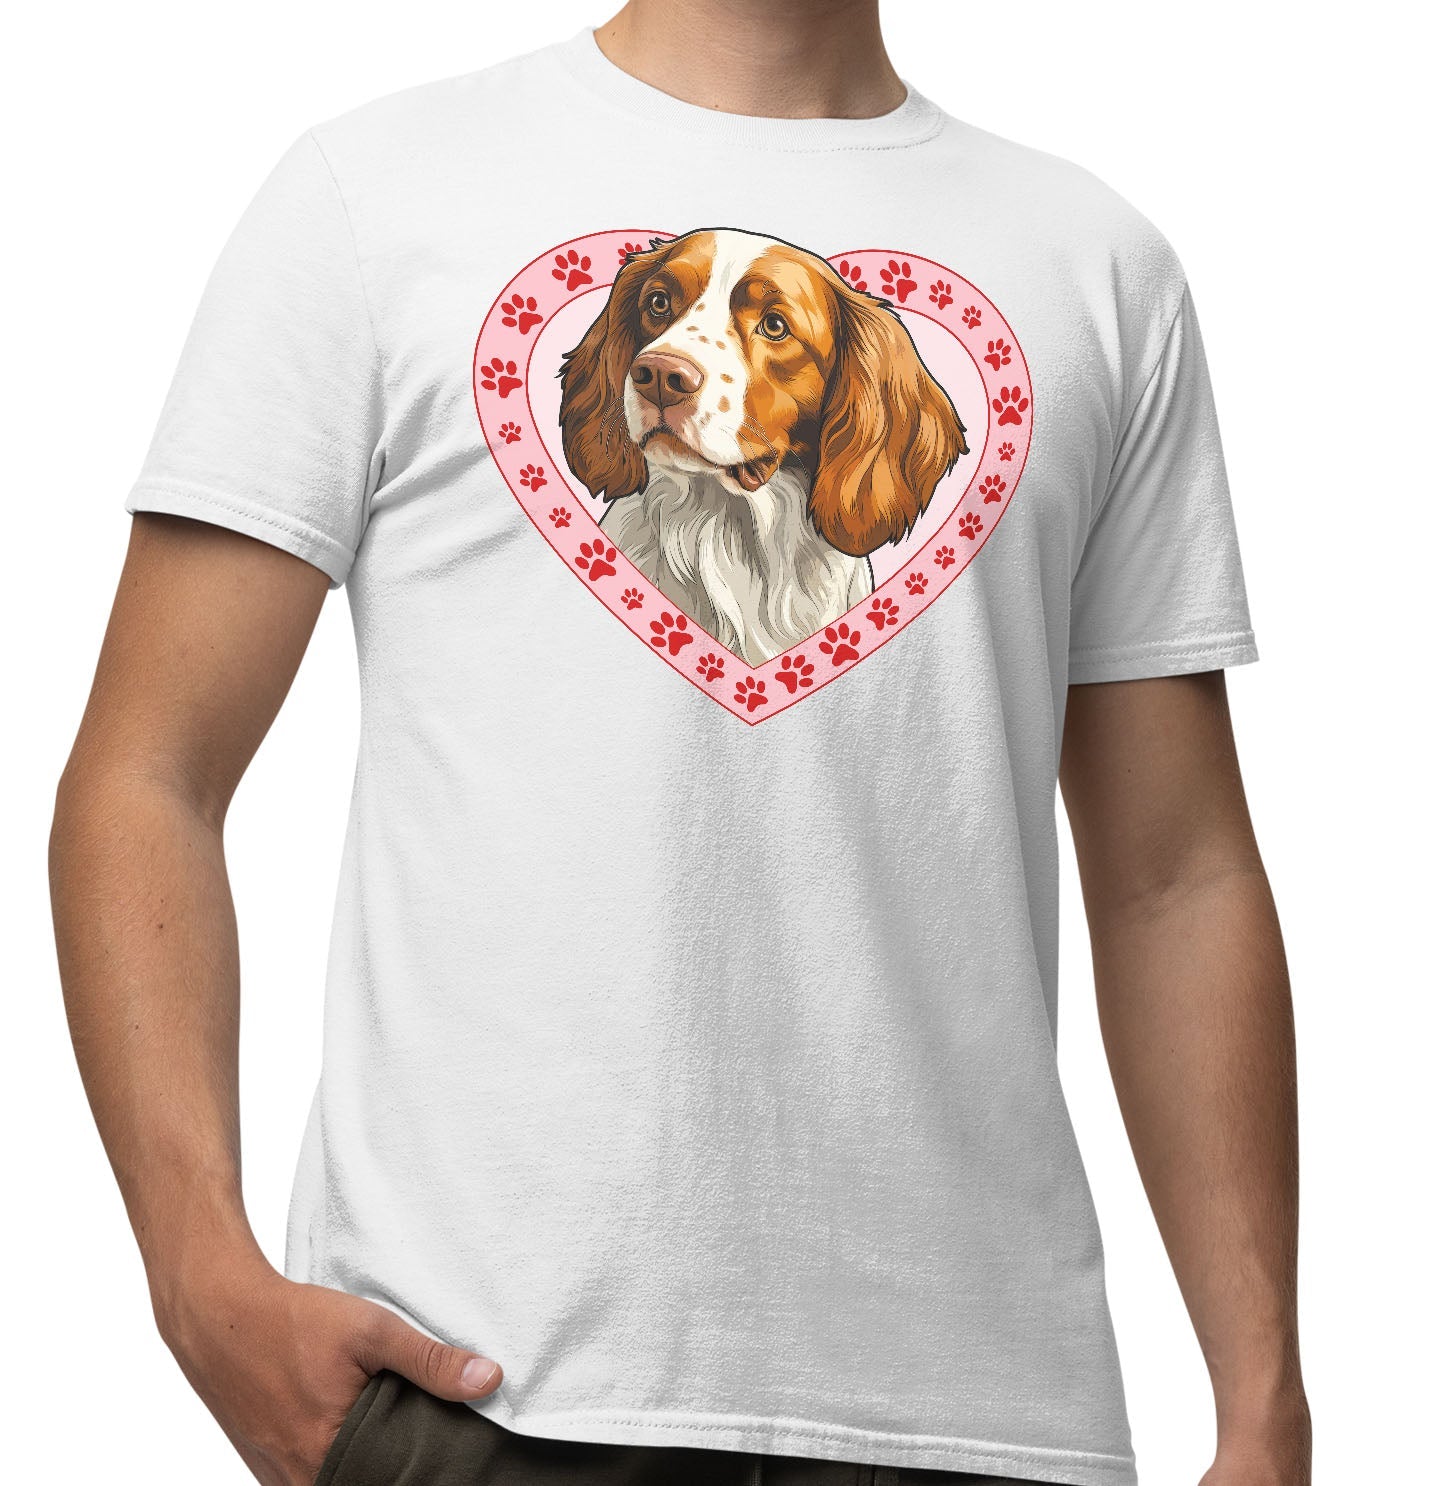 Irish Red and White Setter Illustration In Heart - Adult Unisex T-Shirt